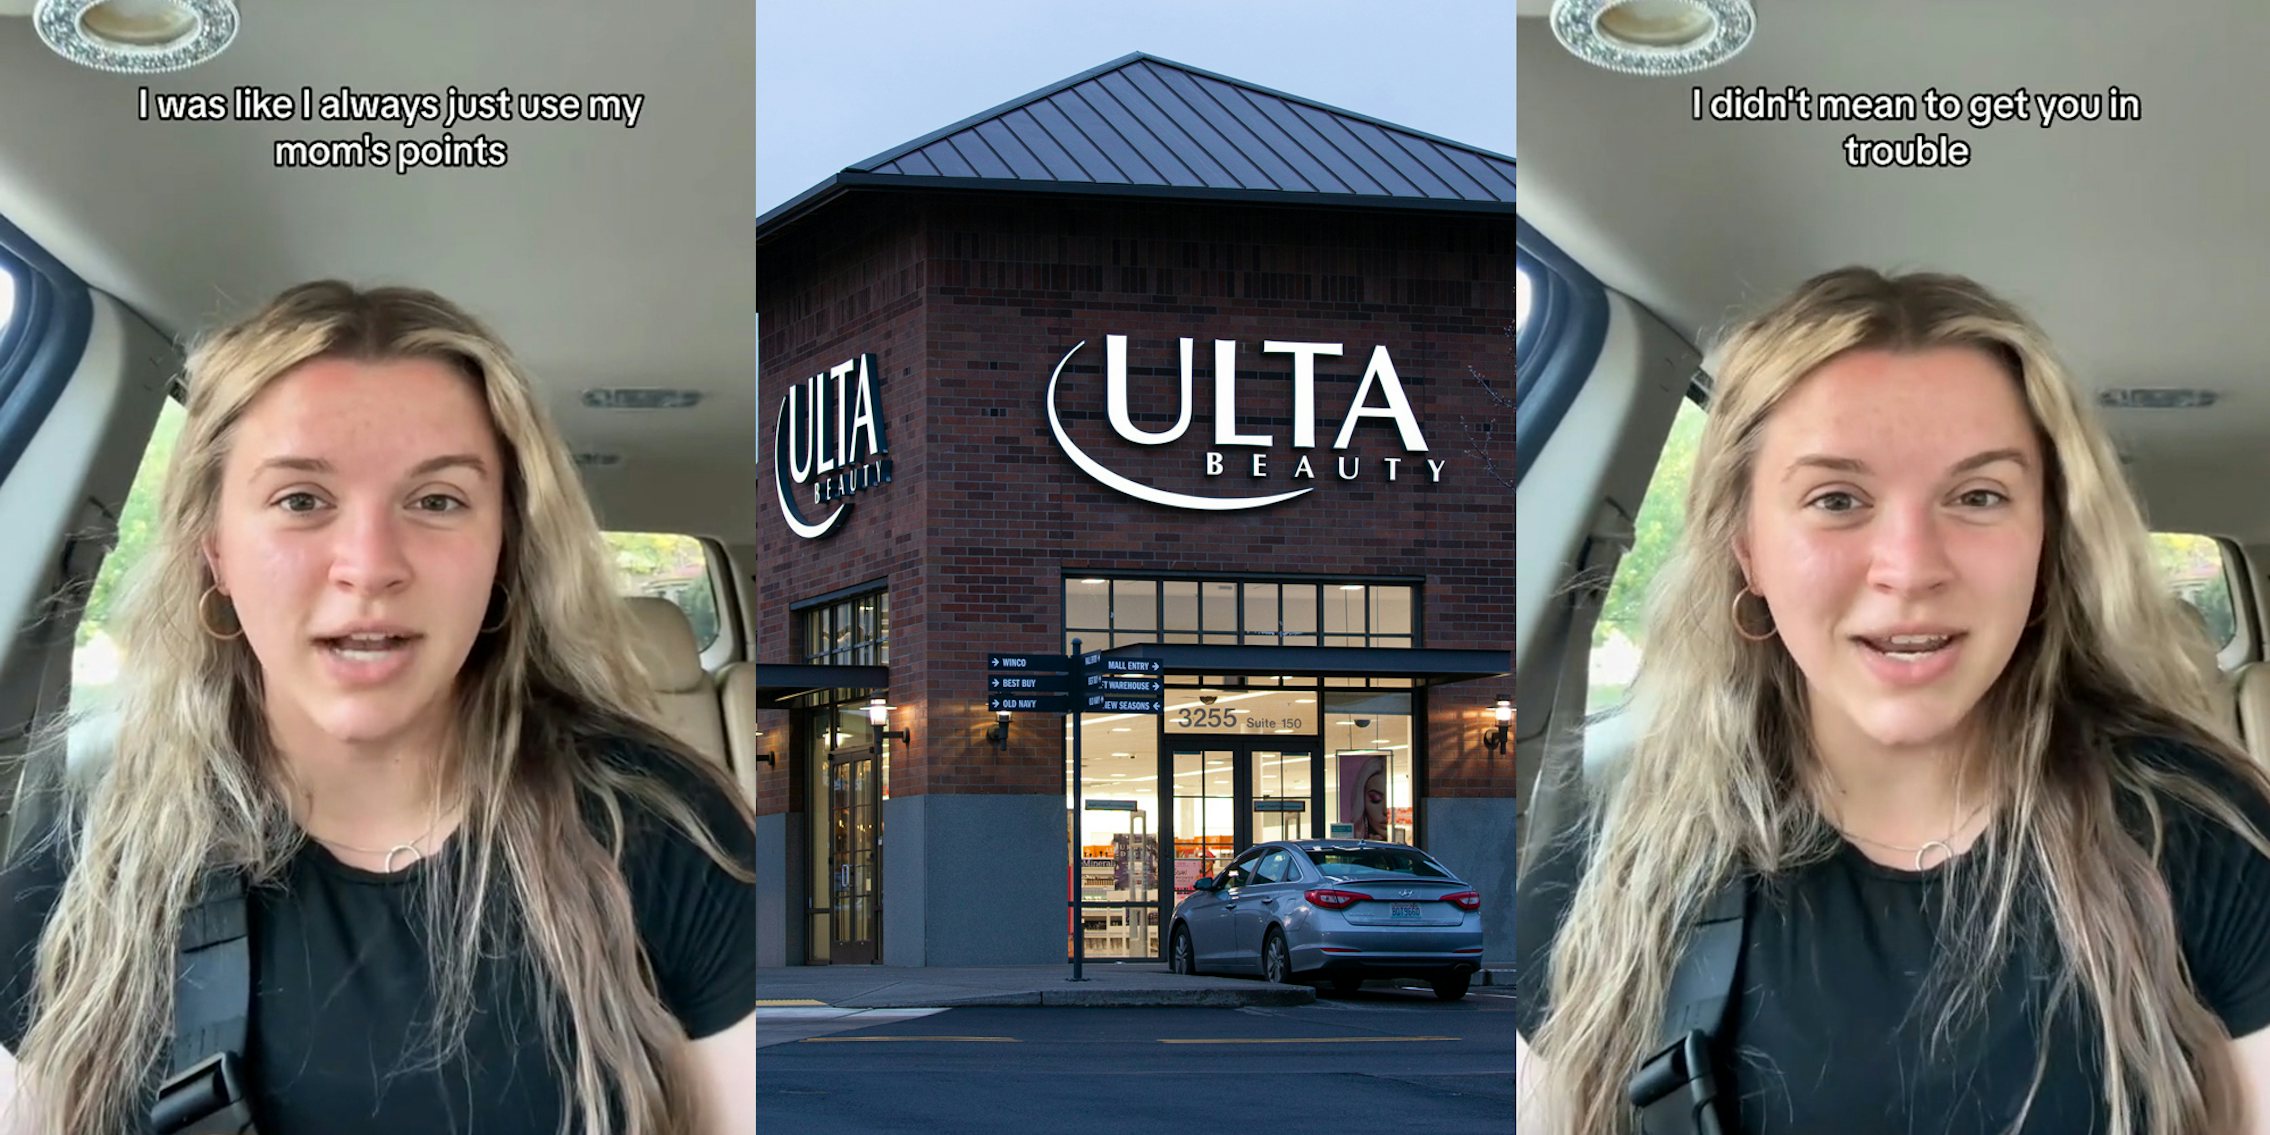 Ulta customer speaking in car with caption 'I was like I always just use my mom's points' (l) Ulta building with signs (c) Ulta customer speaking in car with caption 'I didn't mean to get you in trouble' (r)